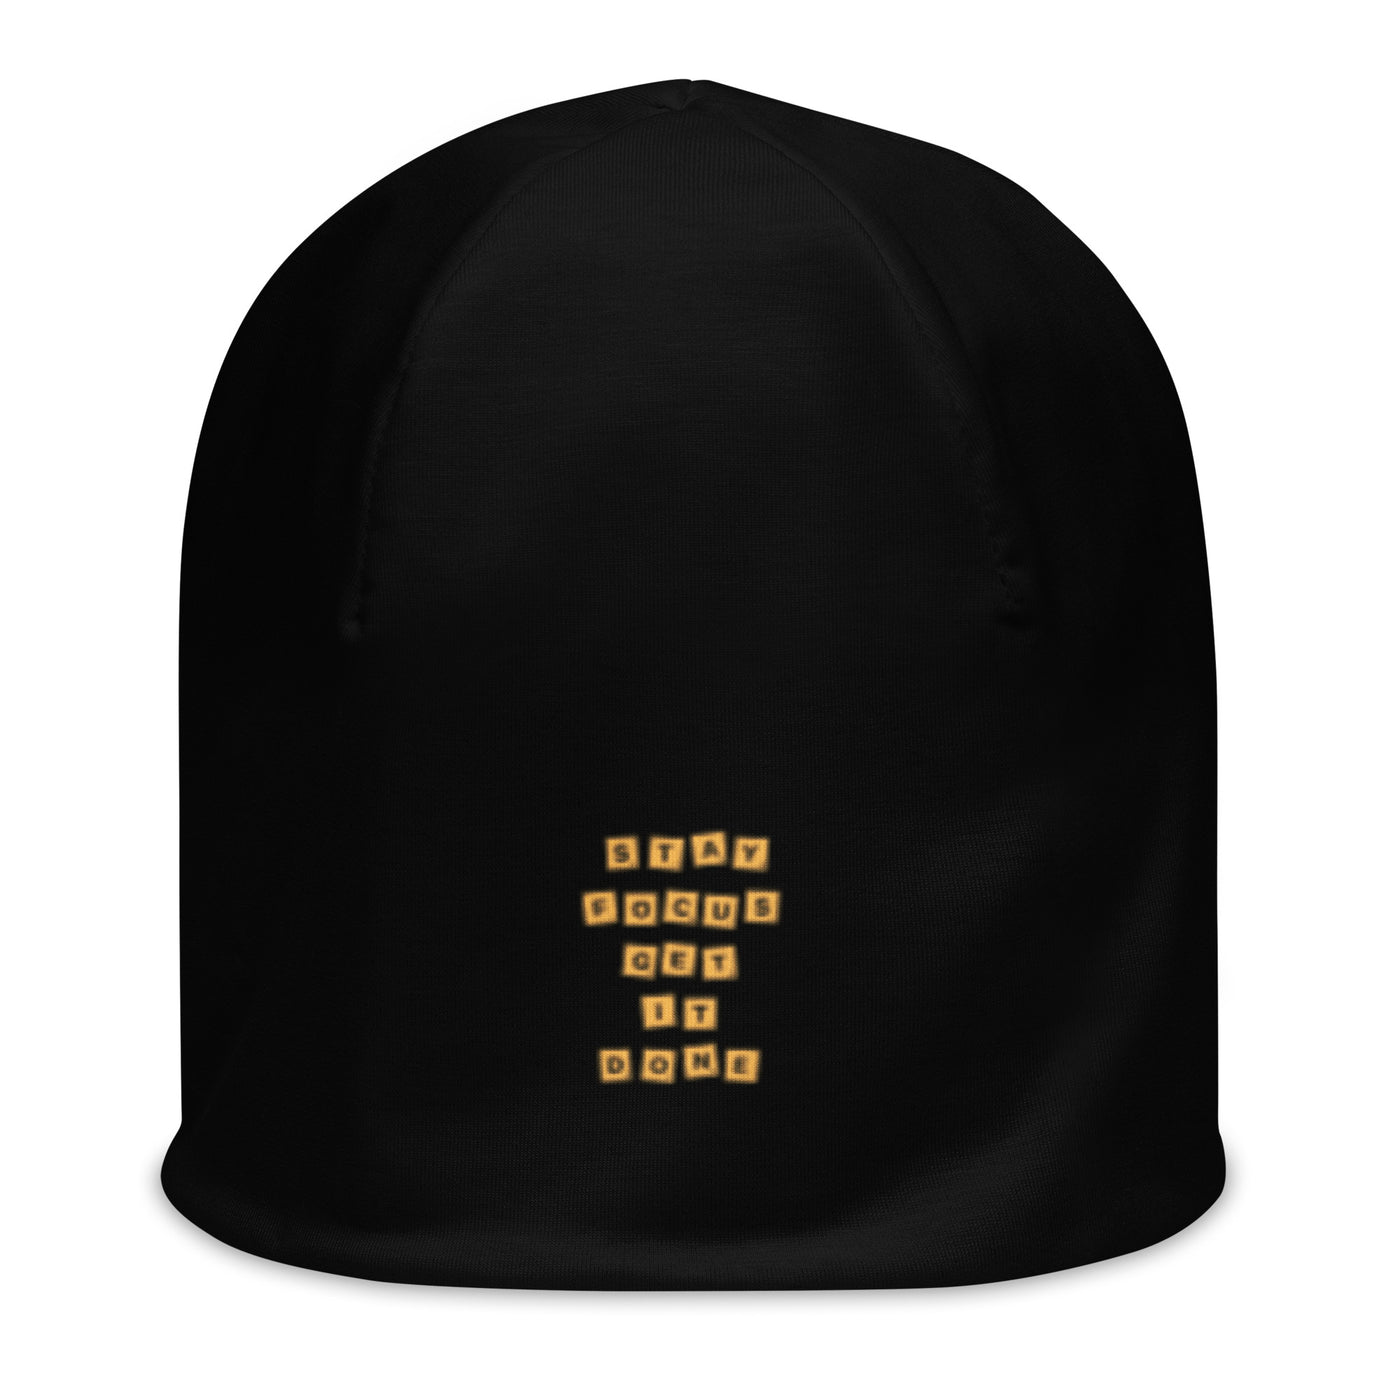 Black Beanie - Stay Focus Get It Done